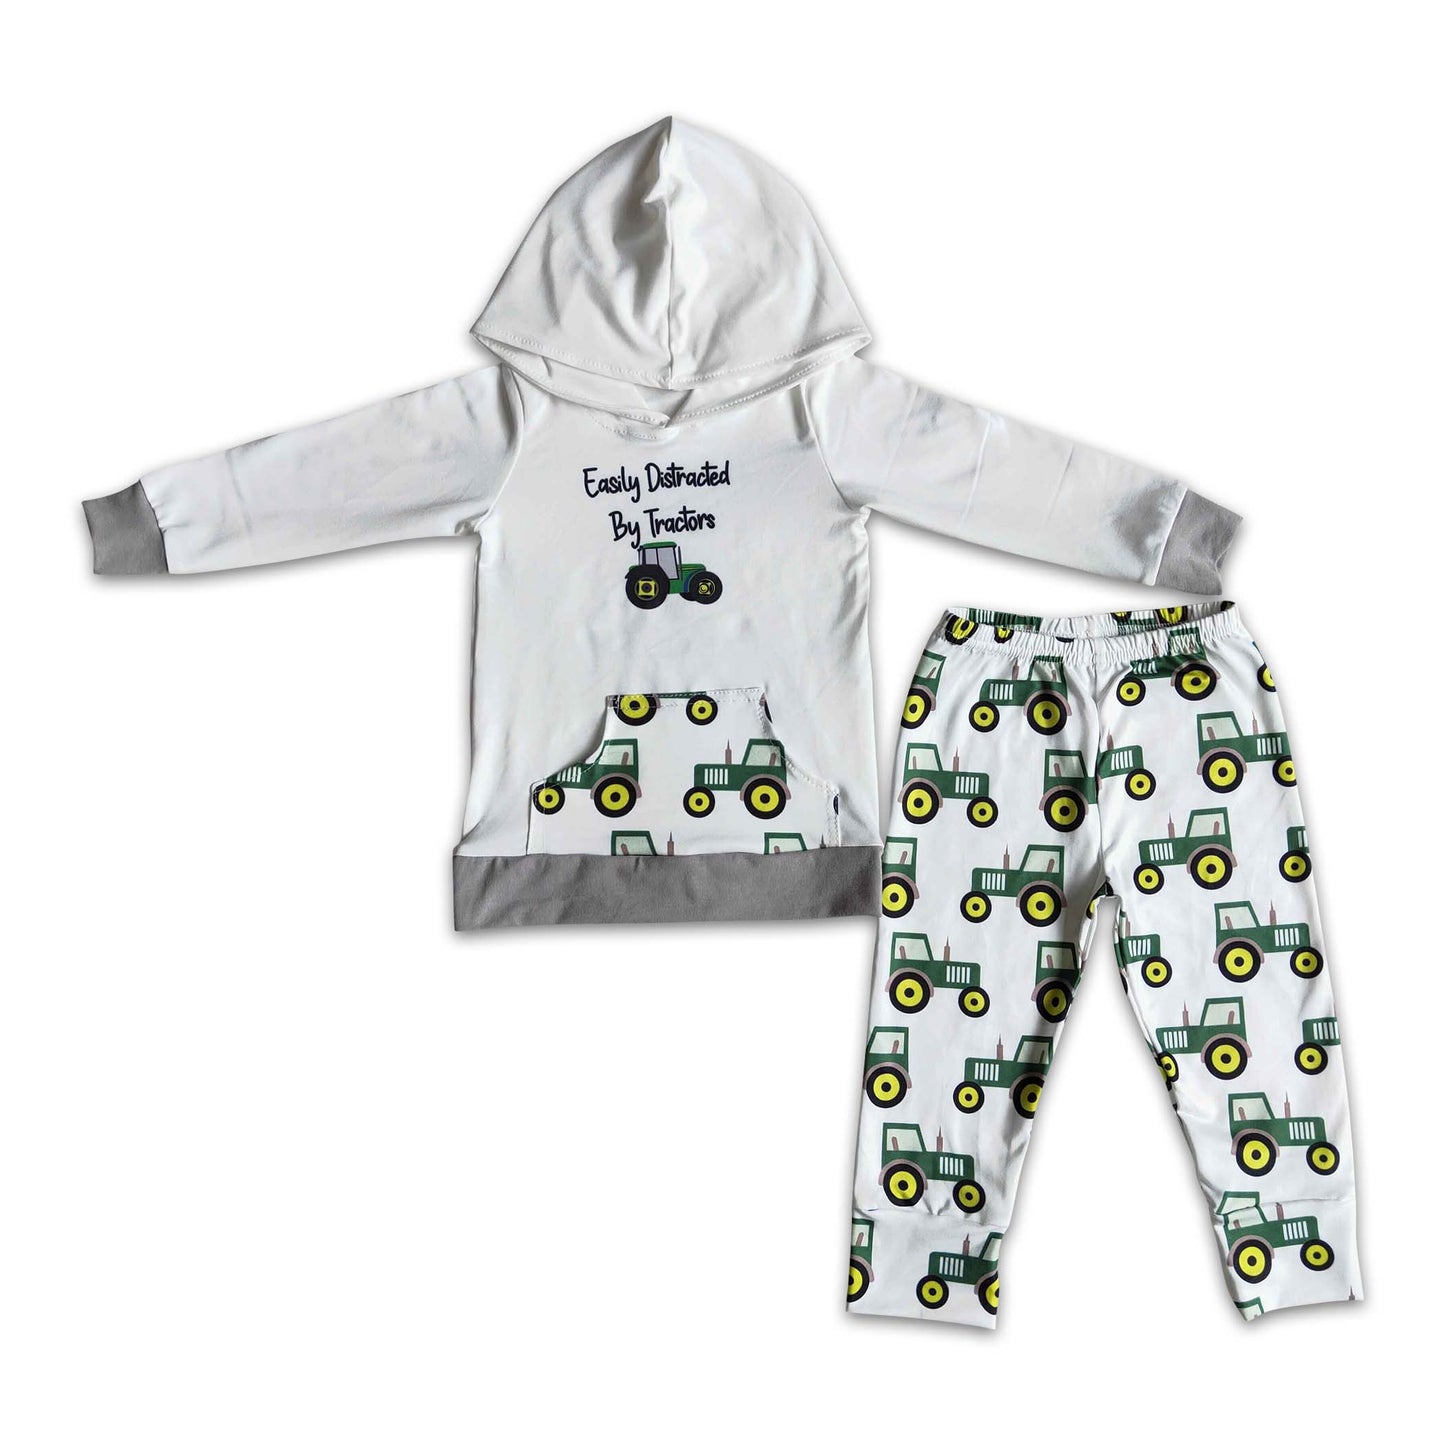 Easily distraced by tractors boy hoodie set